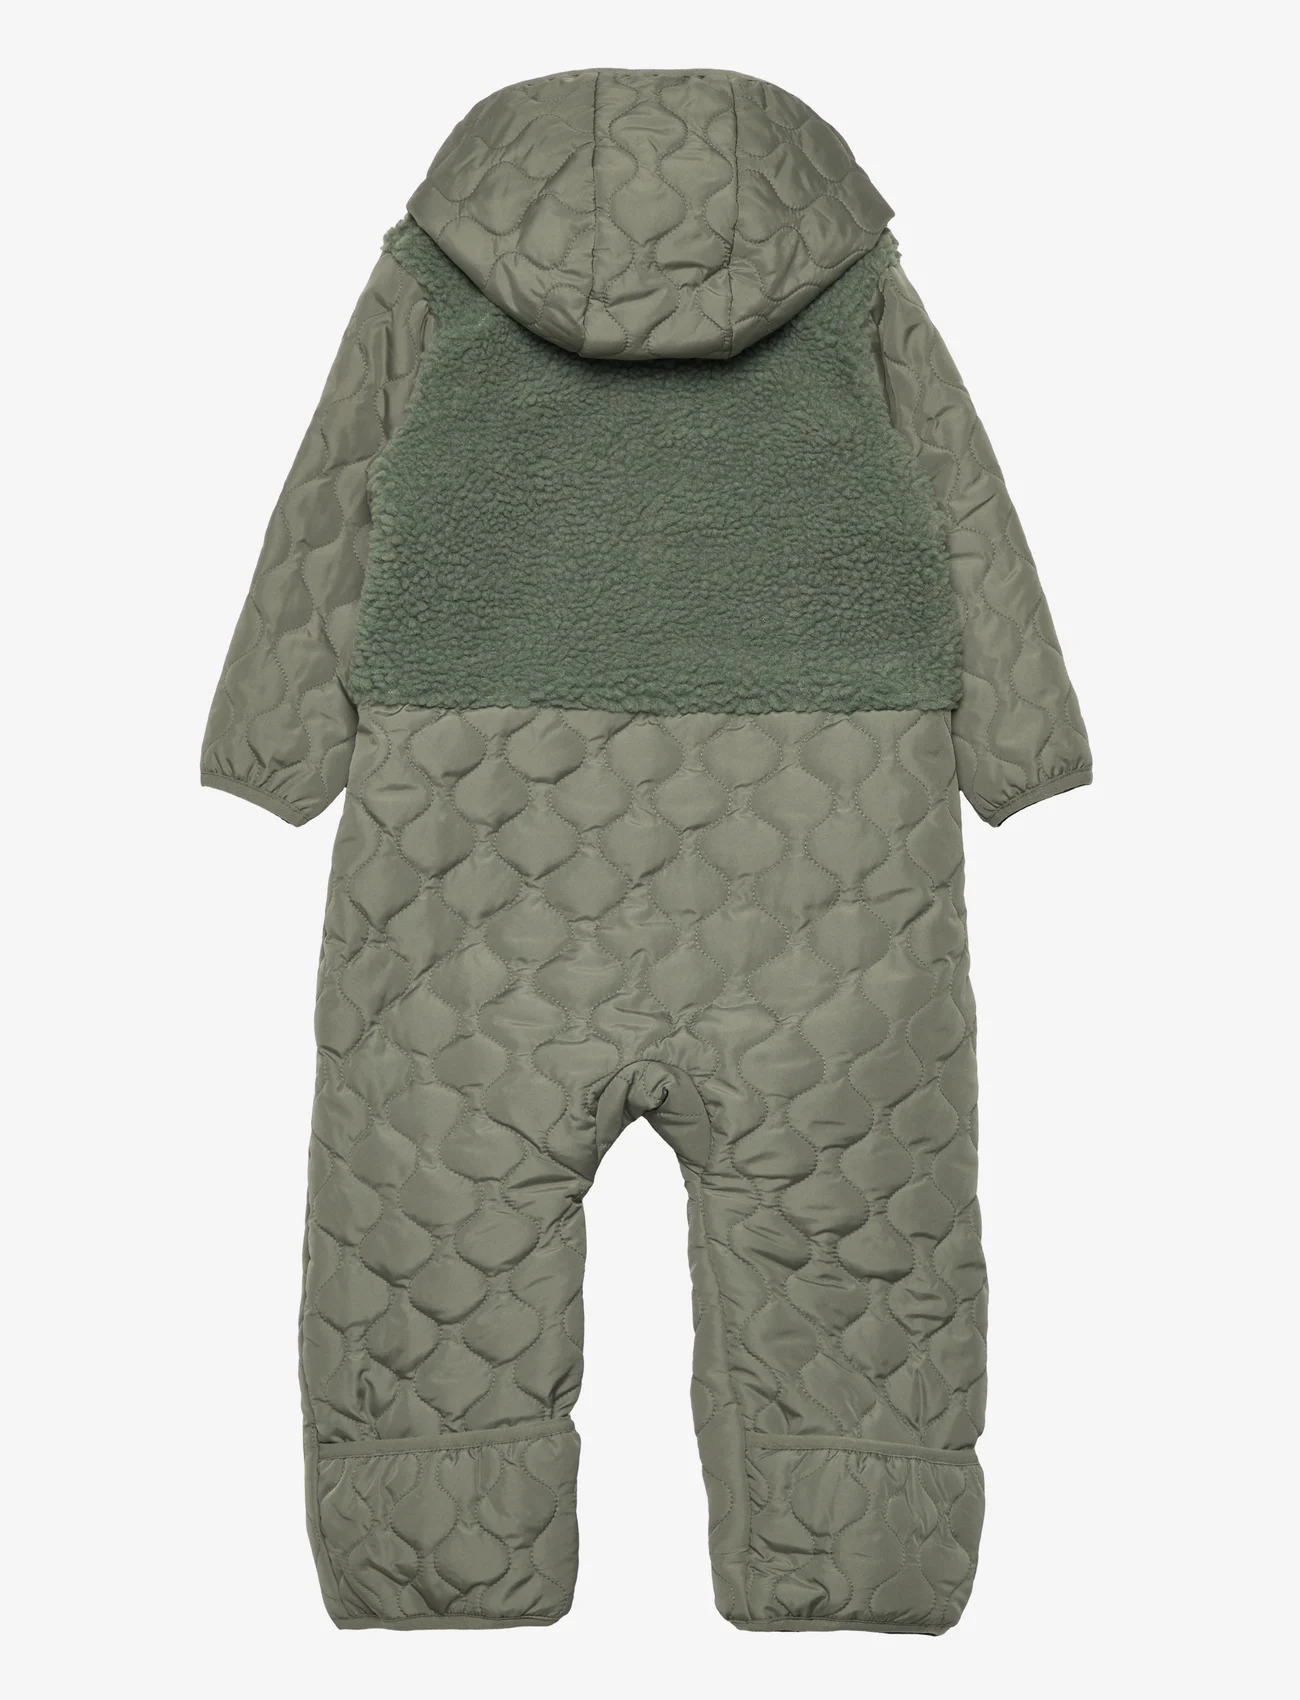 name it - NBNMEMBER QUILT SUIT TB - thermo coveralls - agave green - 1